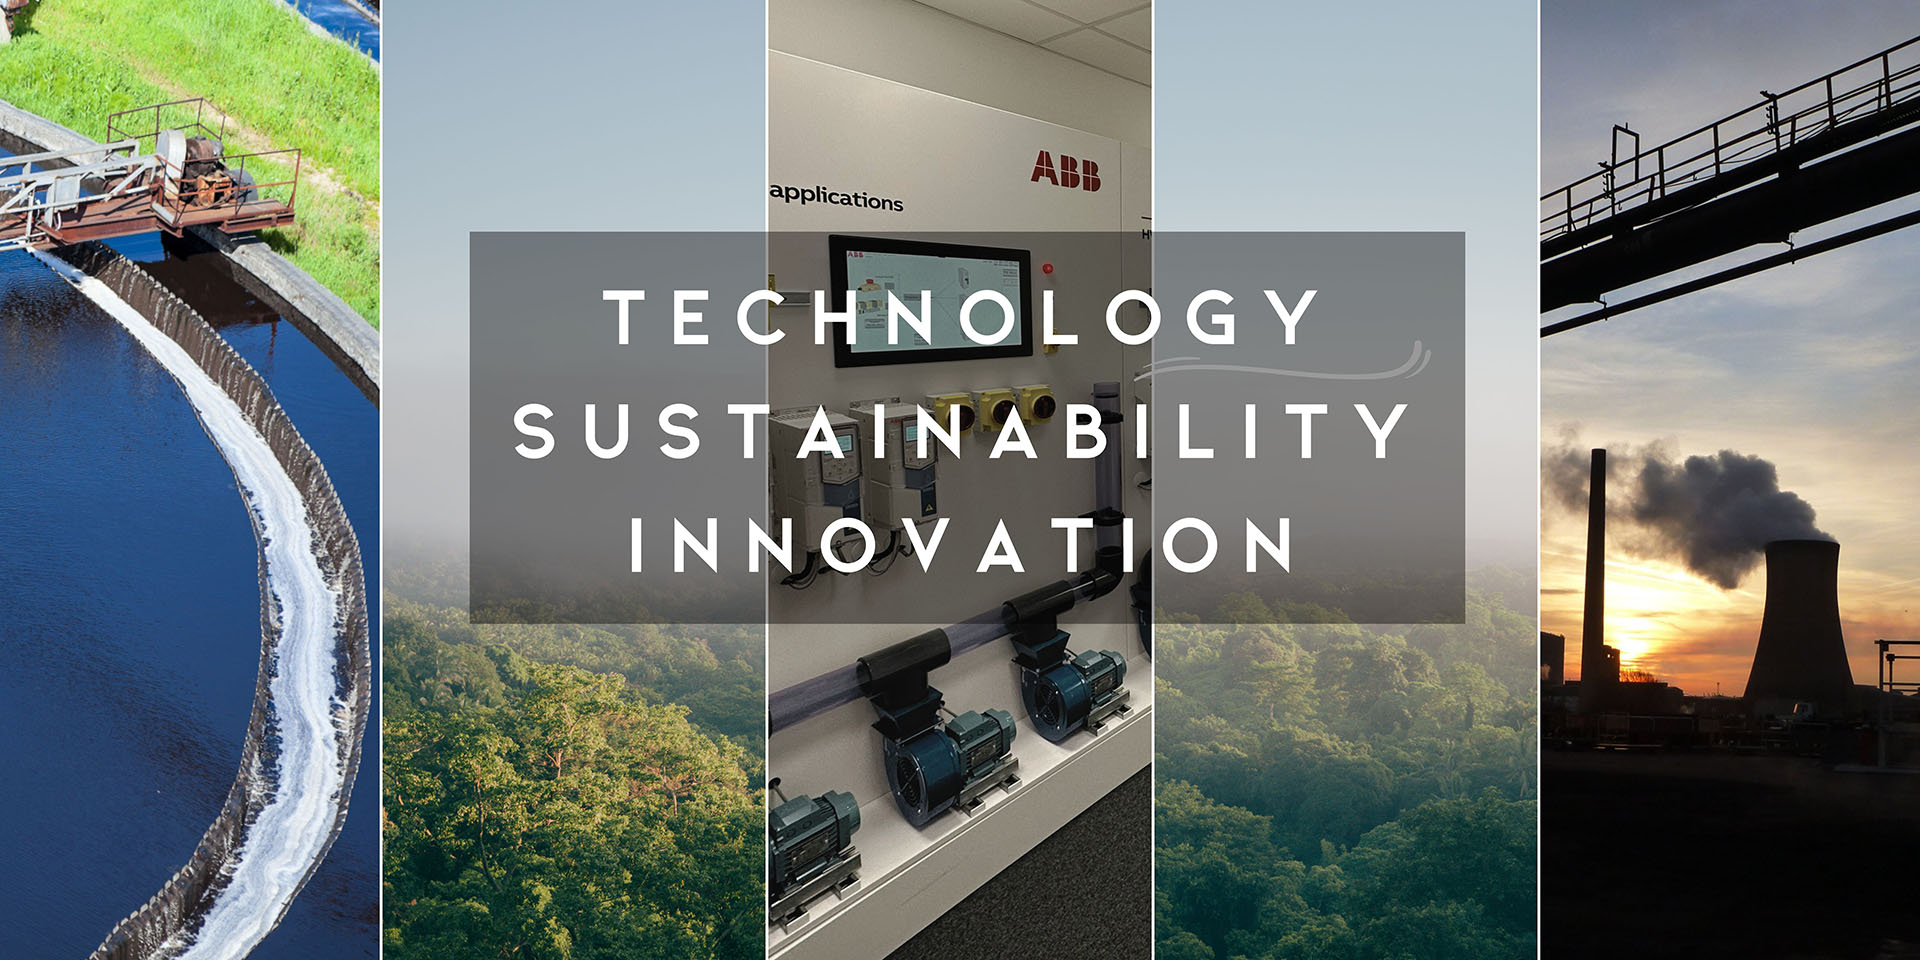 IDS Celebrates 25 Years with a Technology, Sustainability and Innovation Day at ABB’s Coalville Engineering Facility